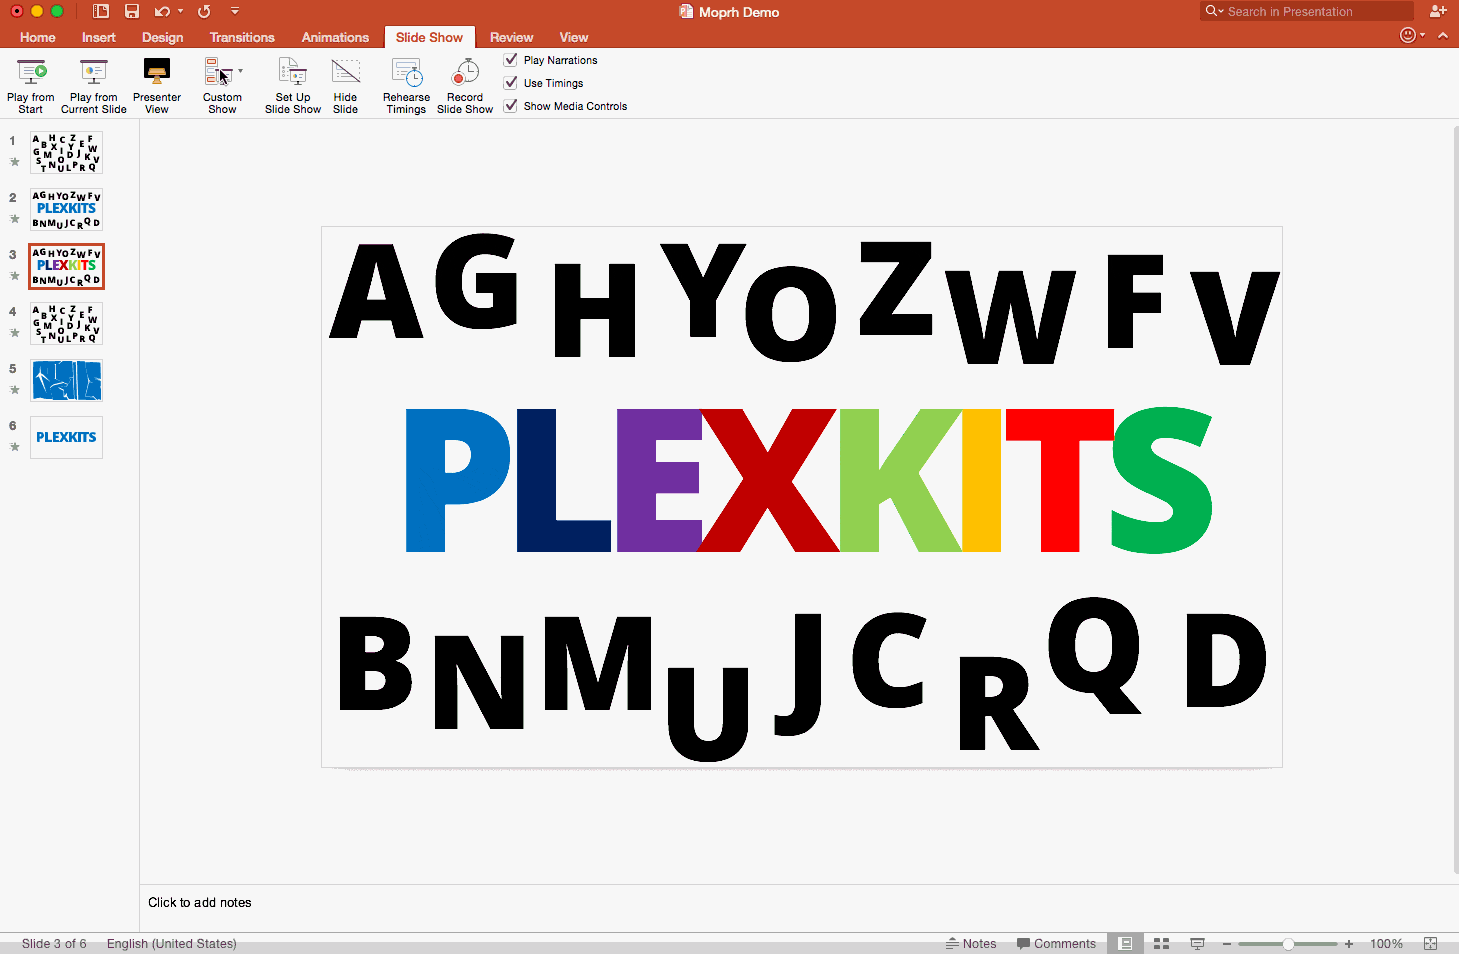 PowerPoint Morph changes text color